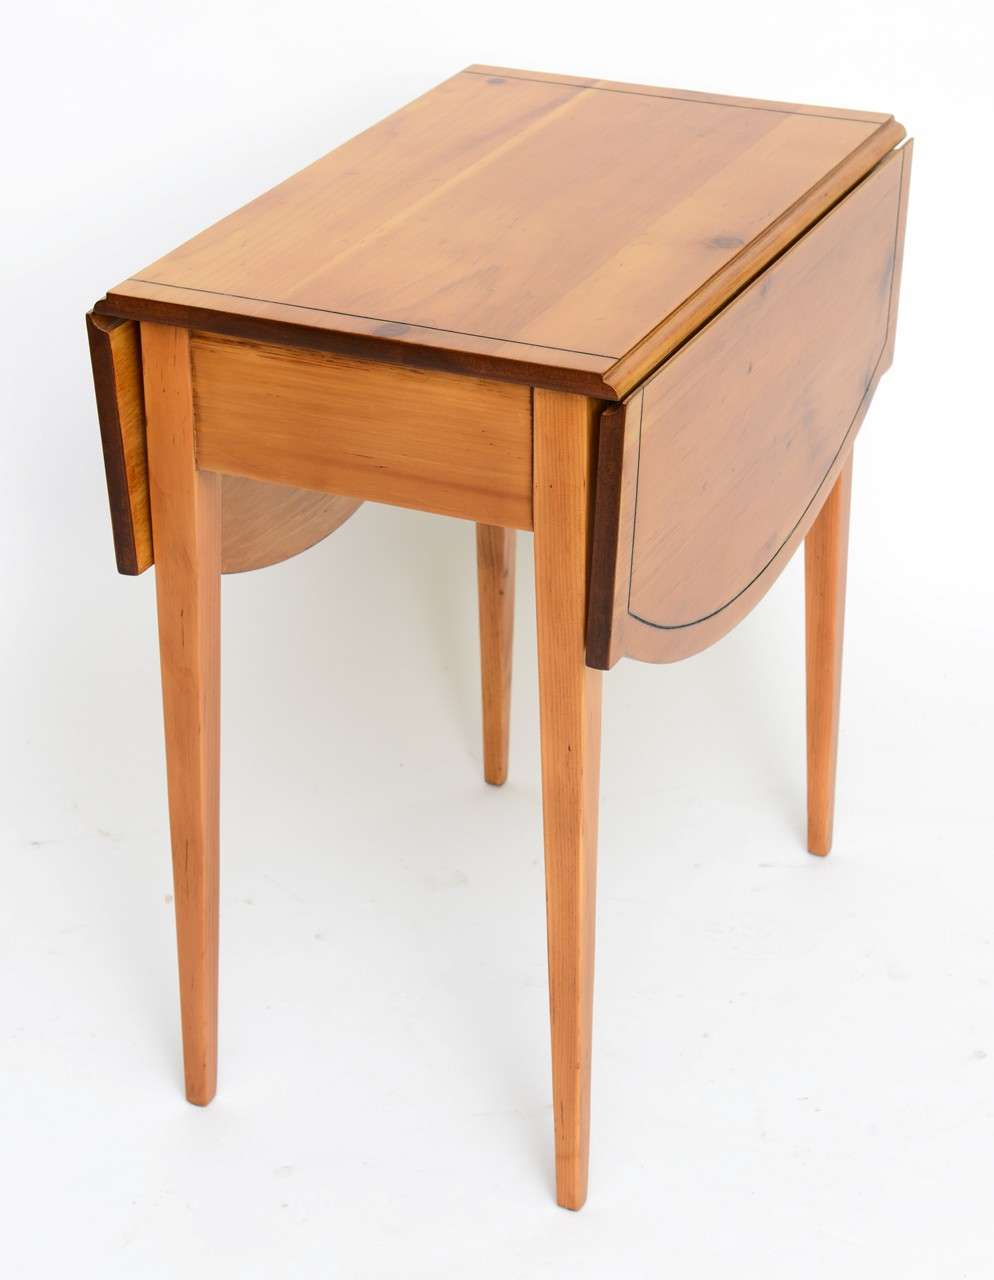 Charming 1940s Maryland Pine Pembroke Table 1